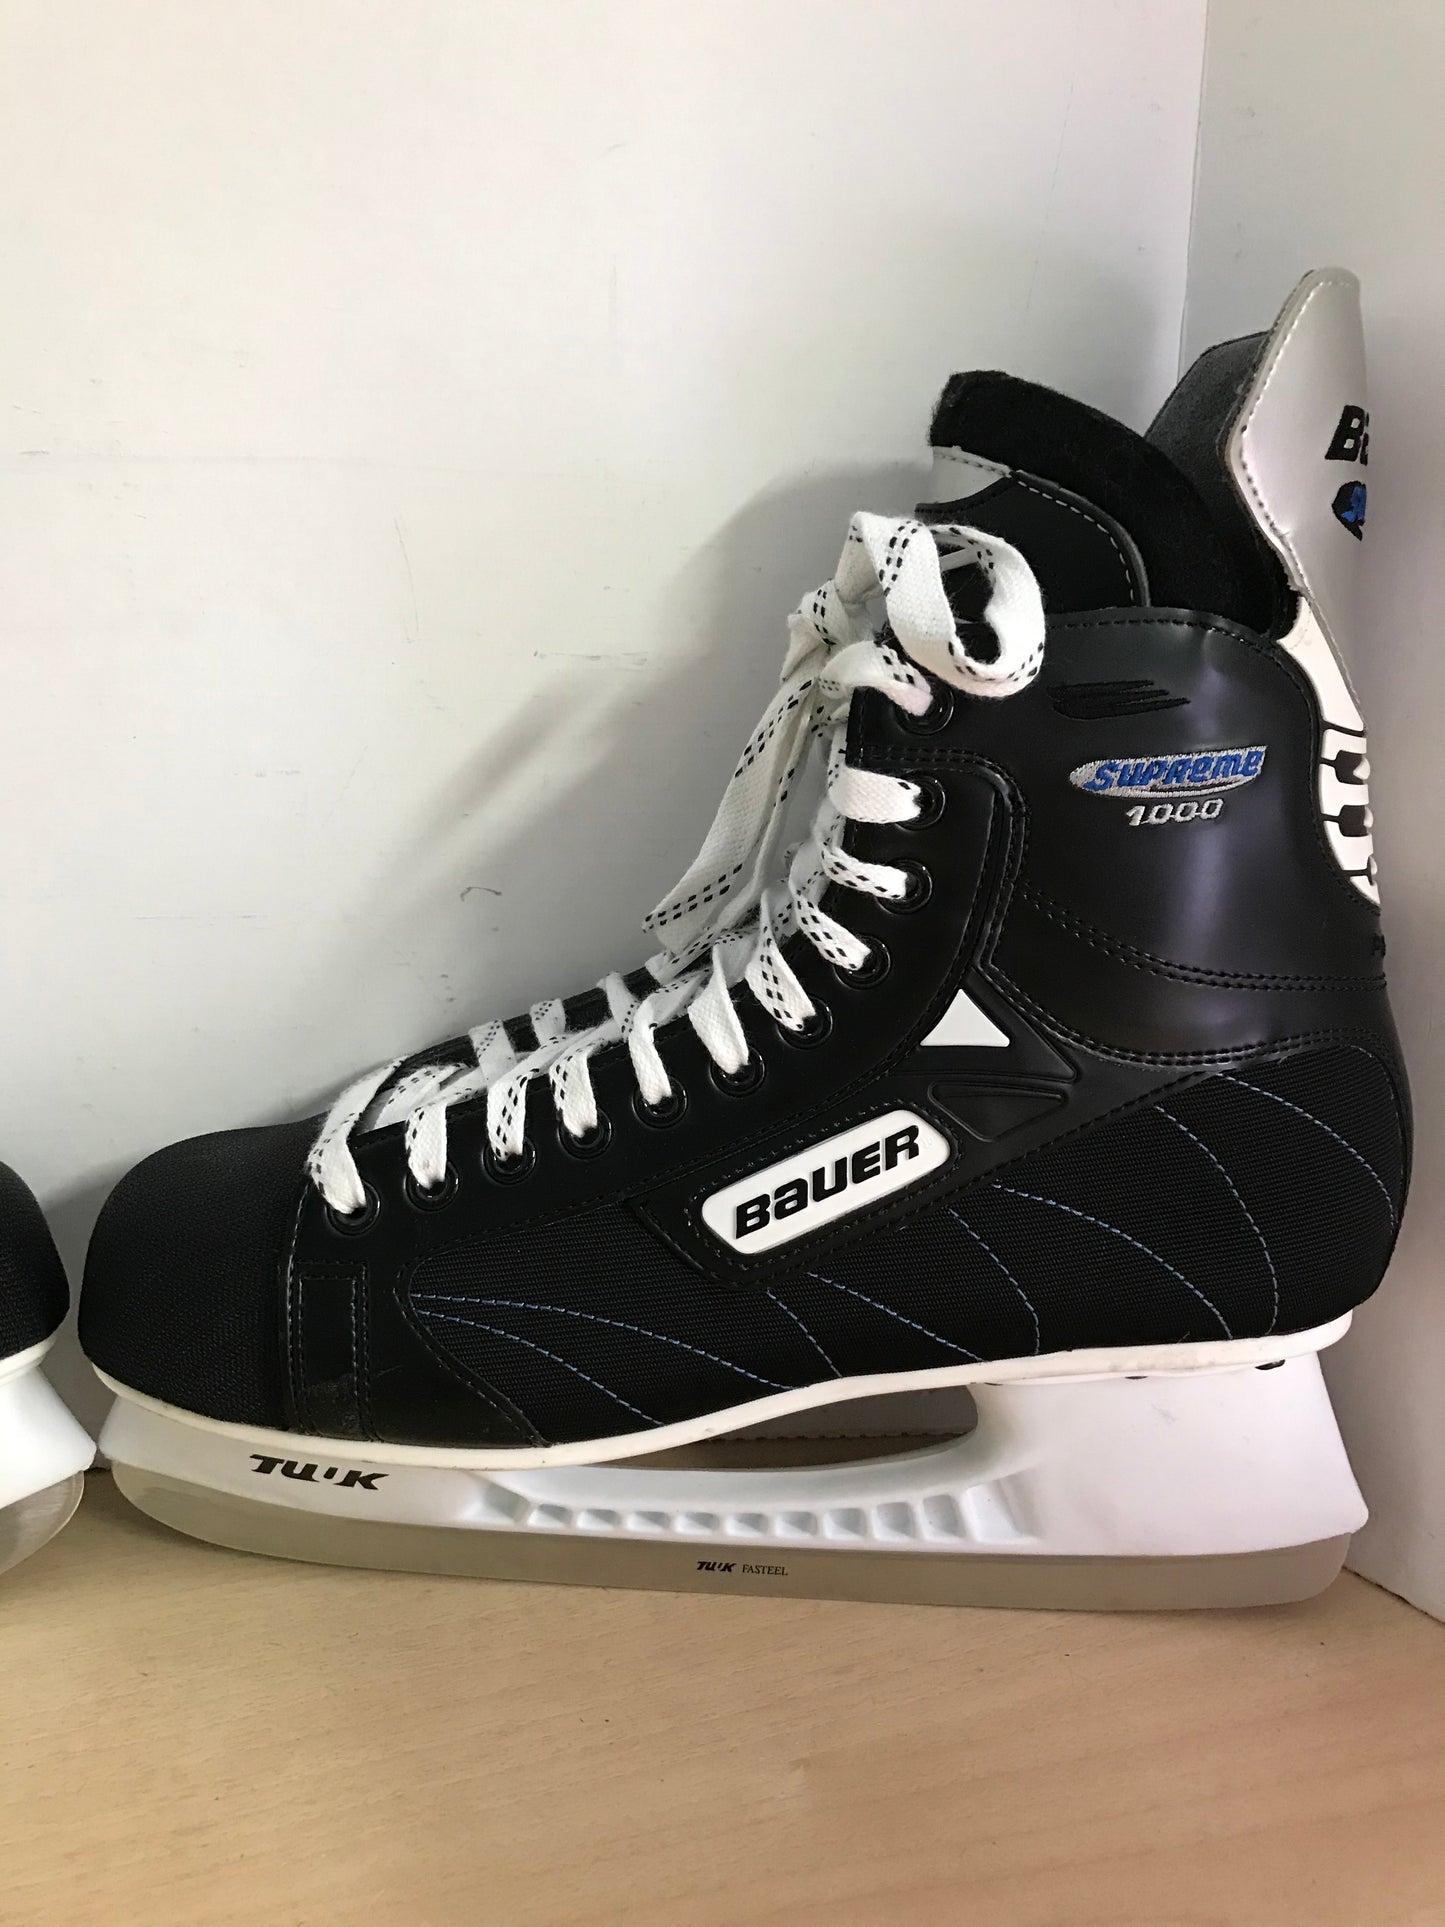 Hockey Skates Men's Size 13.5 Shoe 12 Skate Size Bauer Supreme 1000 New With Tags